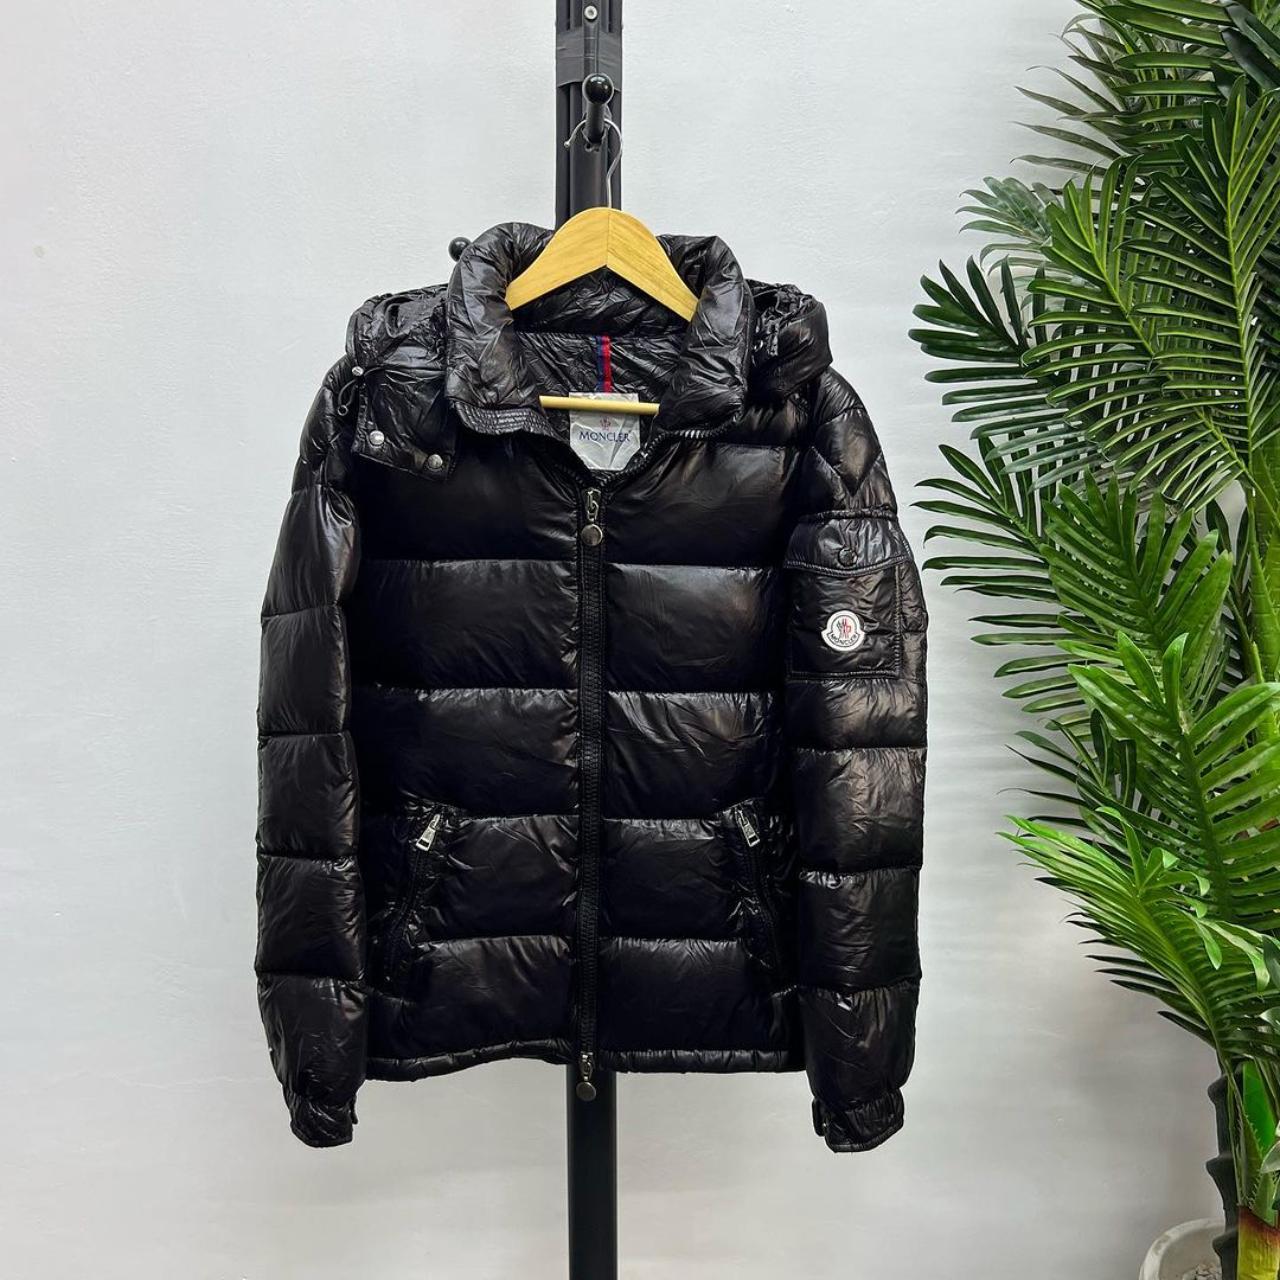 MONCLER JACKET Check out our website for more... - Depop